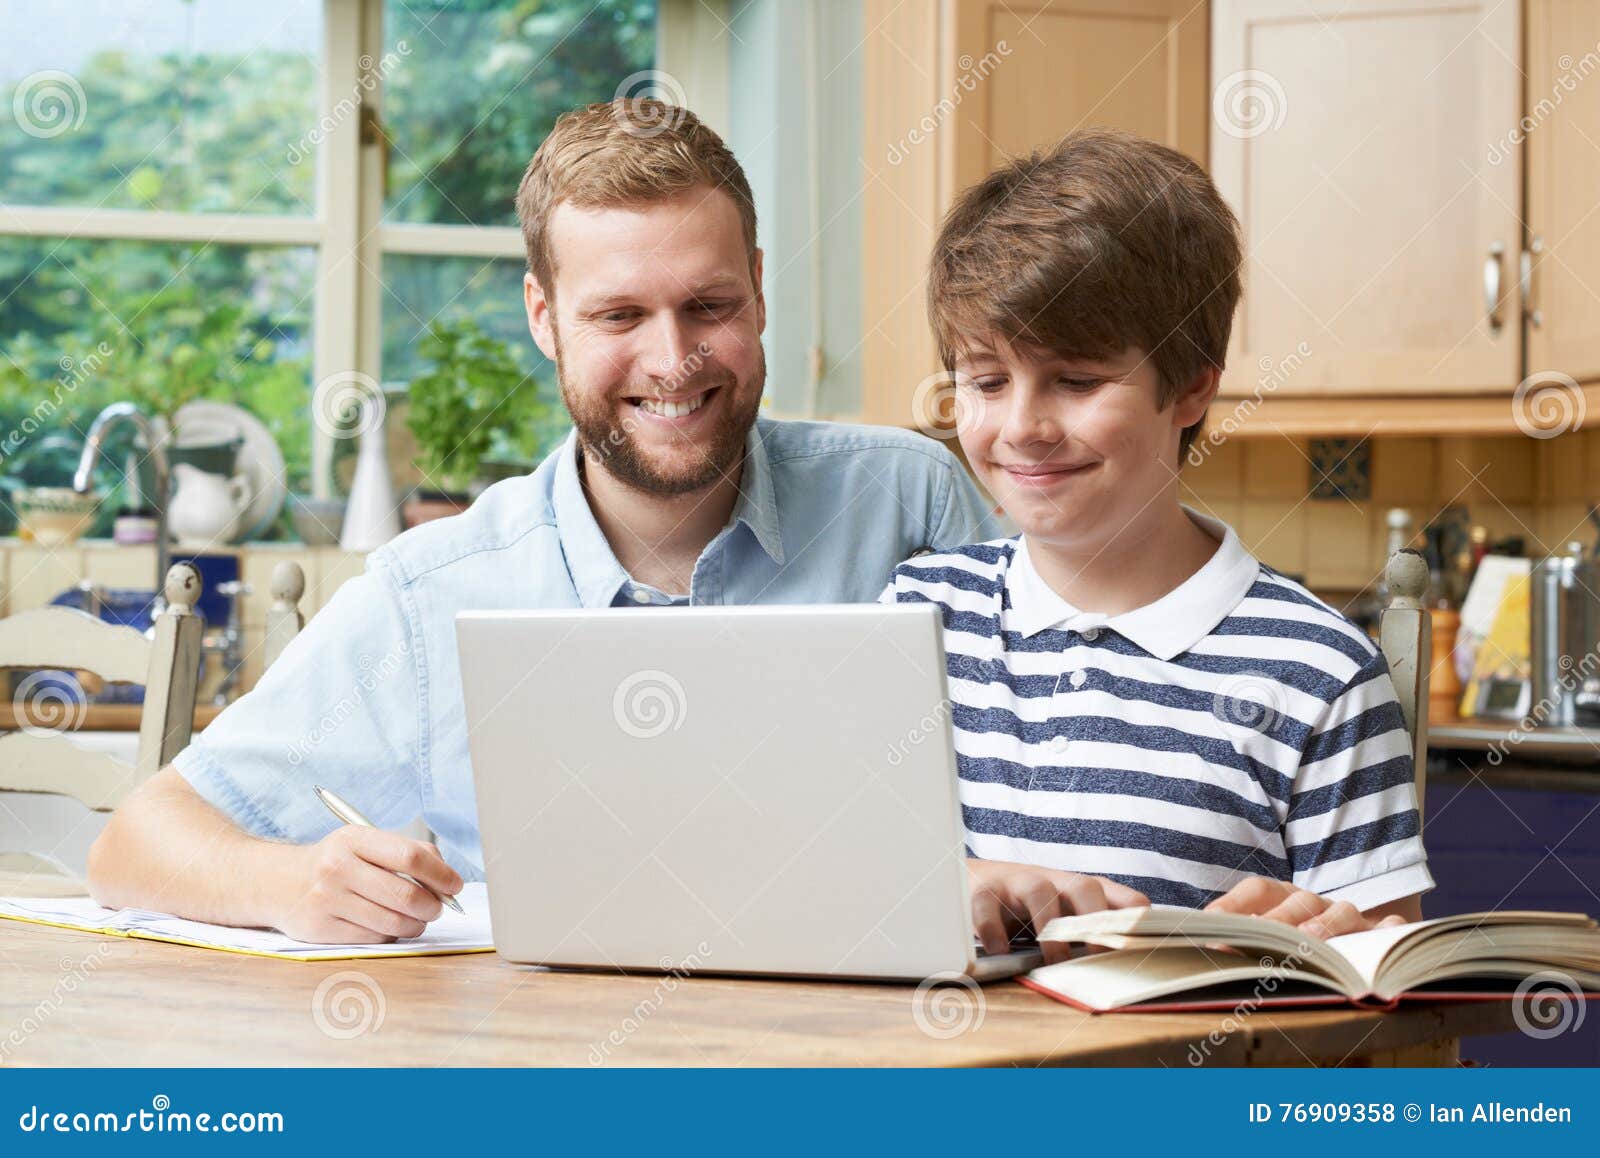 male home tutor helping boy with studies